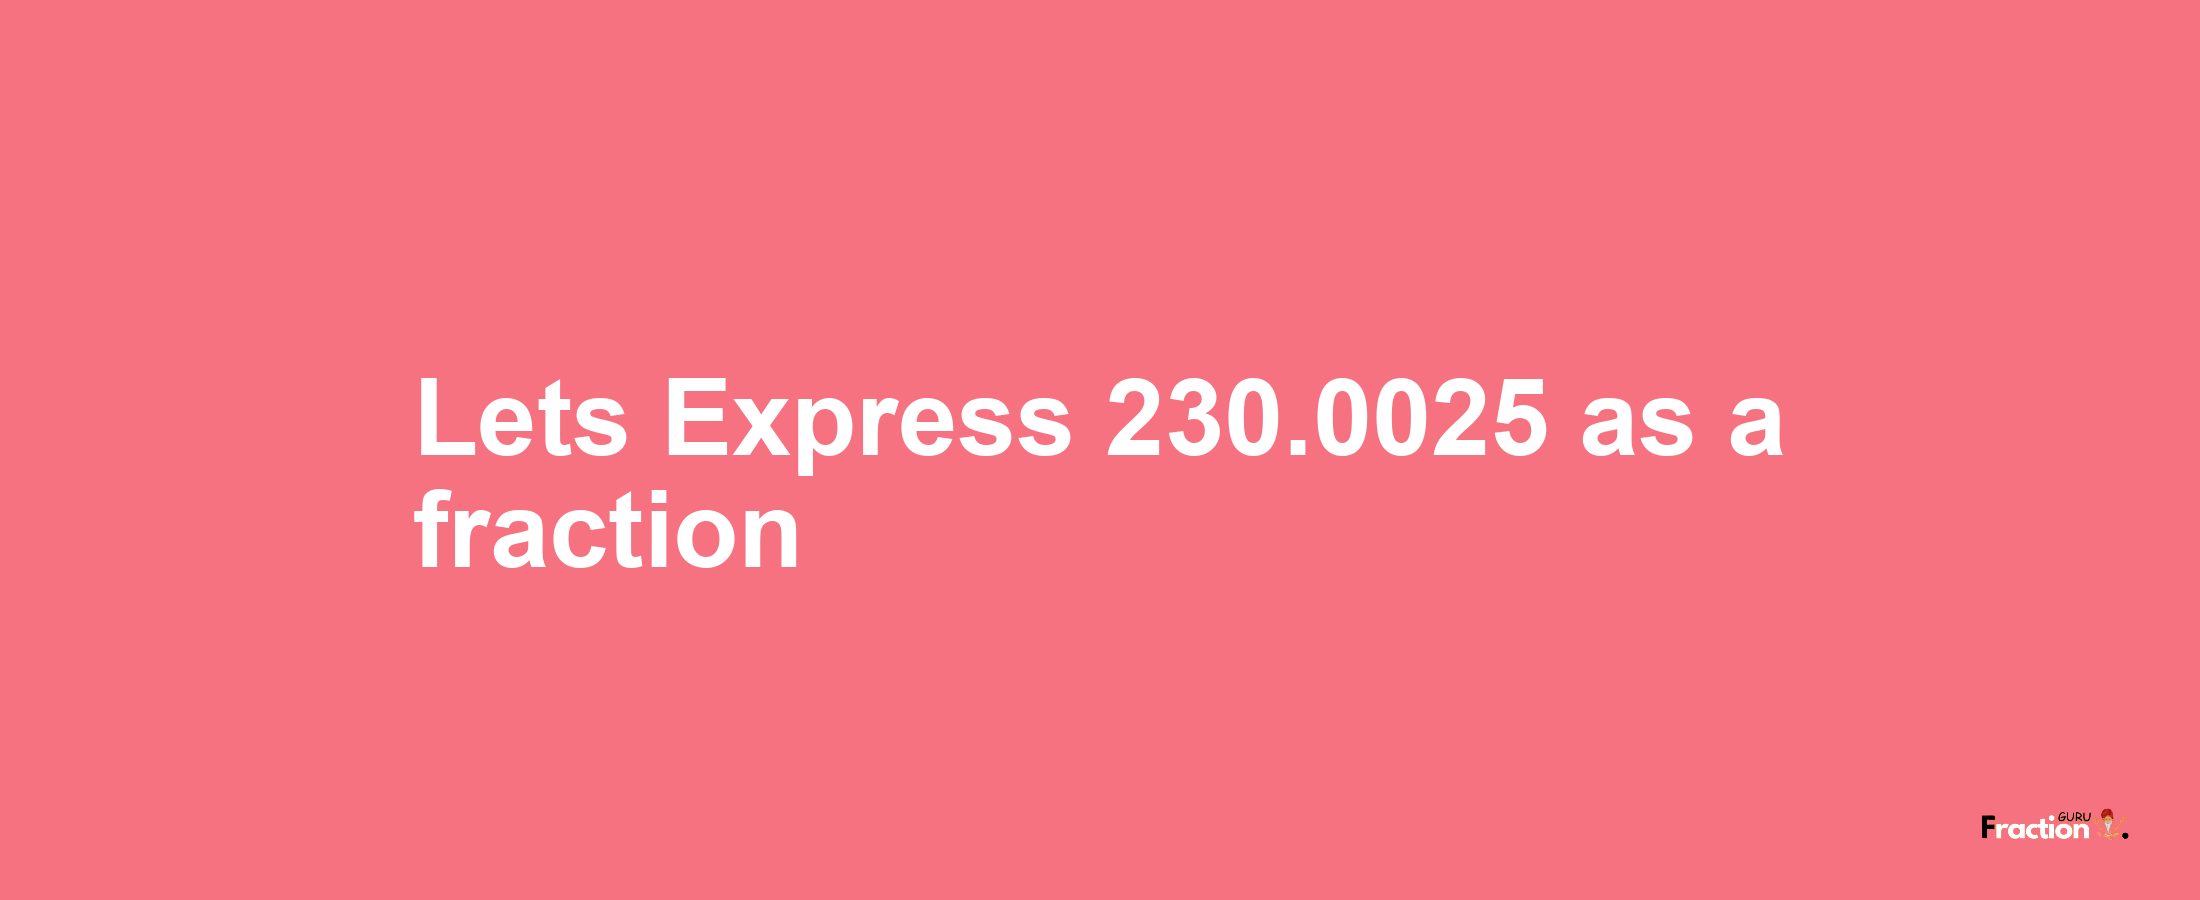 Lets Express 230.0025 as afraction